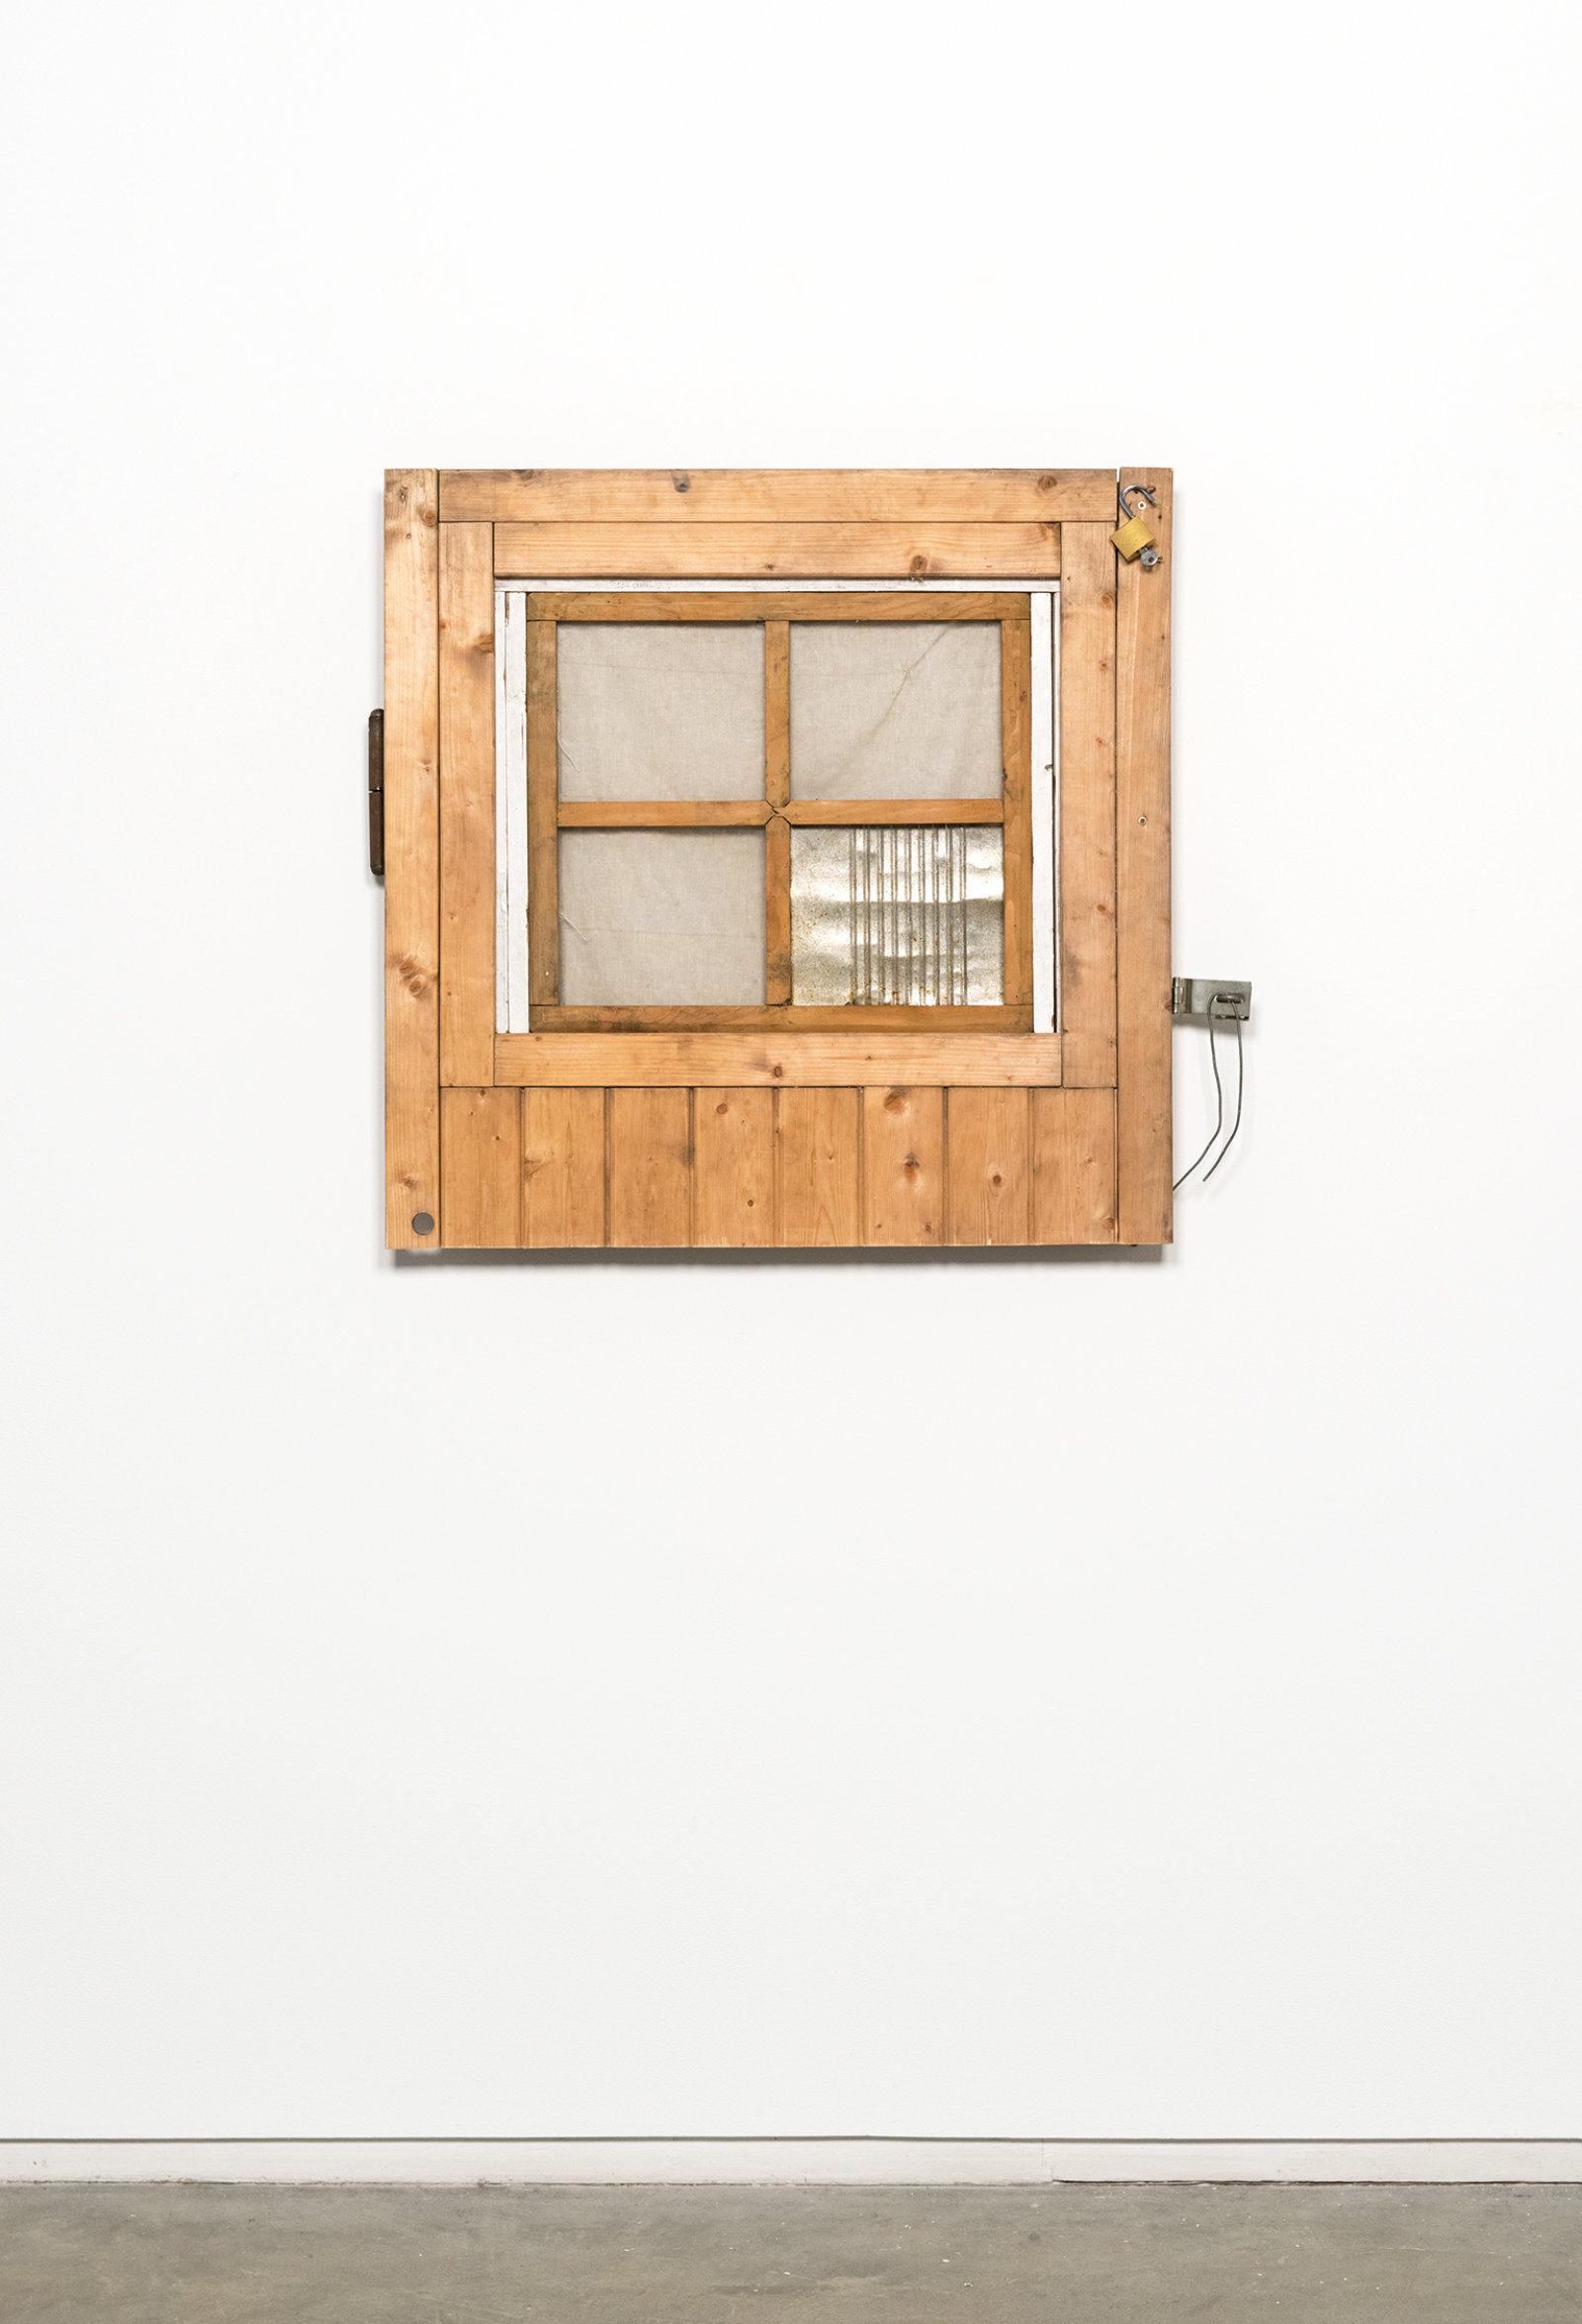 Ashes Withyman, Section of the Groundskeeper’s old door (for B.K.) from a place, near the buried canal, 2011–2012, wood, linen, tin can, lock with key, hinge, 32 x 32 x 3 in. (81 x 82 x 8 cm)